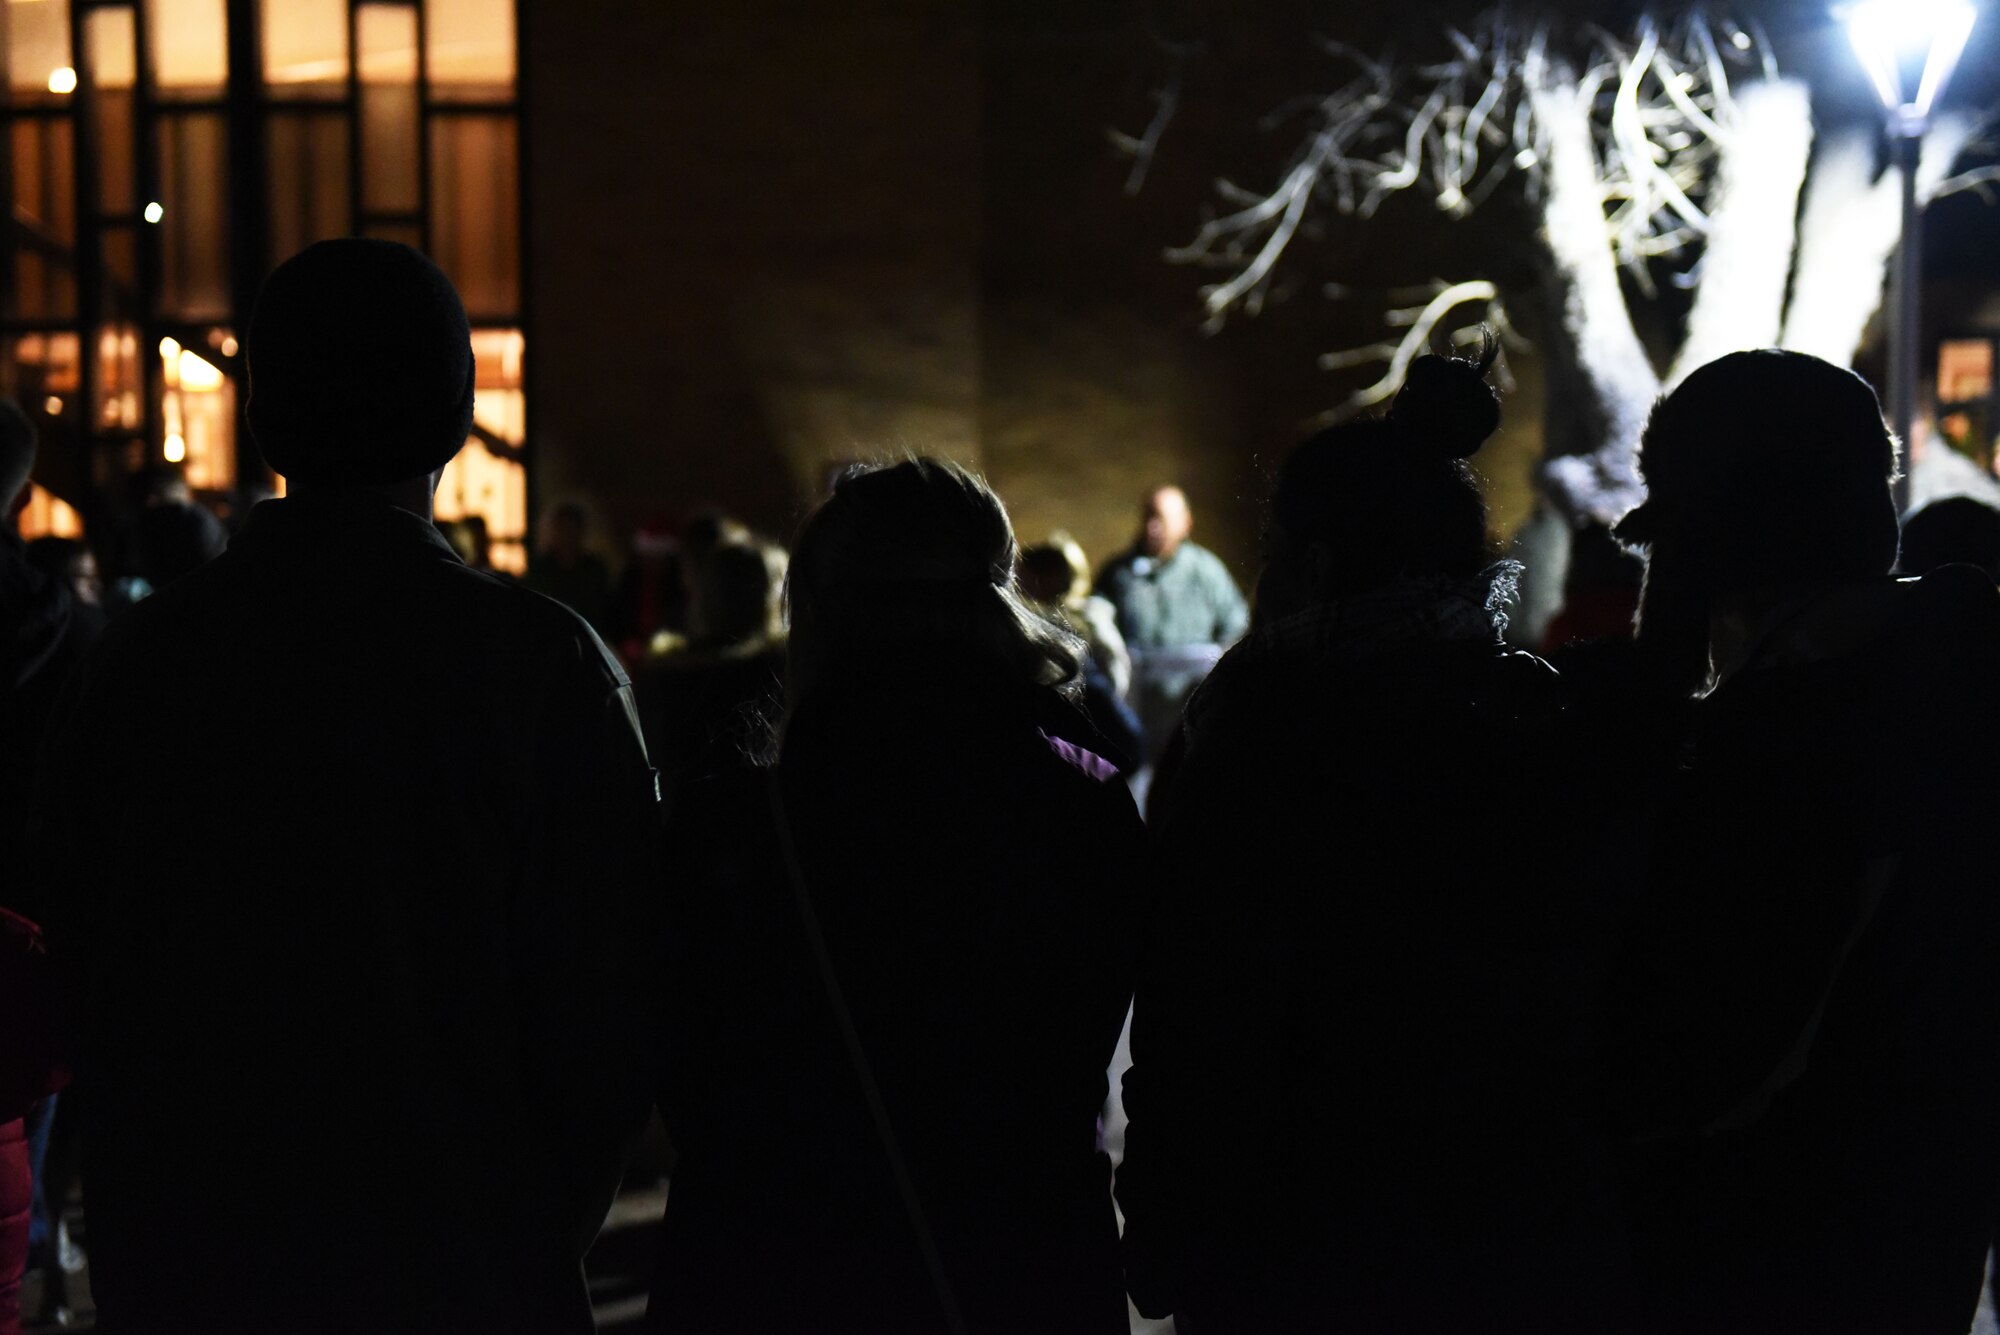 Airmen and their families listen to a speech during the tree lighting ceremony at the Freedom Chapel on Ellsworth Air Force Base, S.D., Nov. 30, 2018. Airmen and their families came out to celebrate the lighting of the base tree and to start the holidays in a festive and family-friendly environment where multiple religions were represented. (U.S. Air Force photo by Airman 1st Class Thomas Karol)